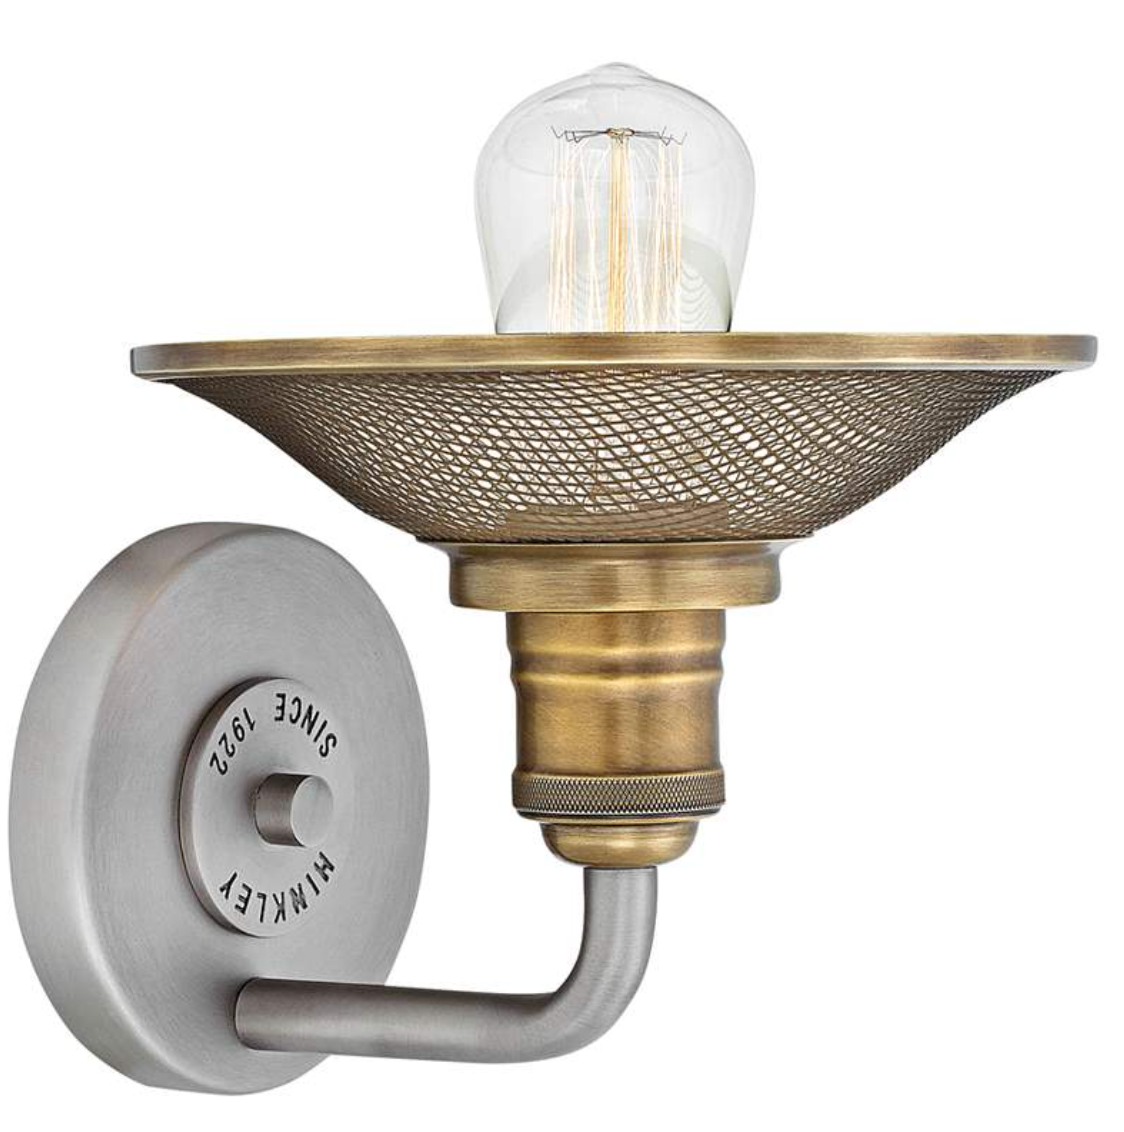 Sconce Hinkley Rigby 8 3/4" High Antique Nickel Wall